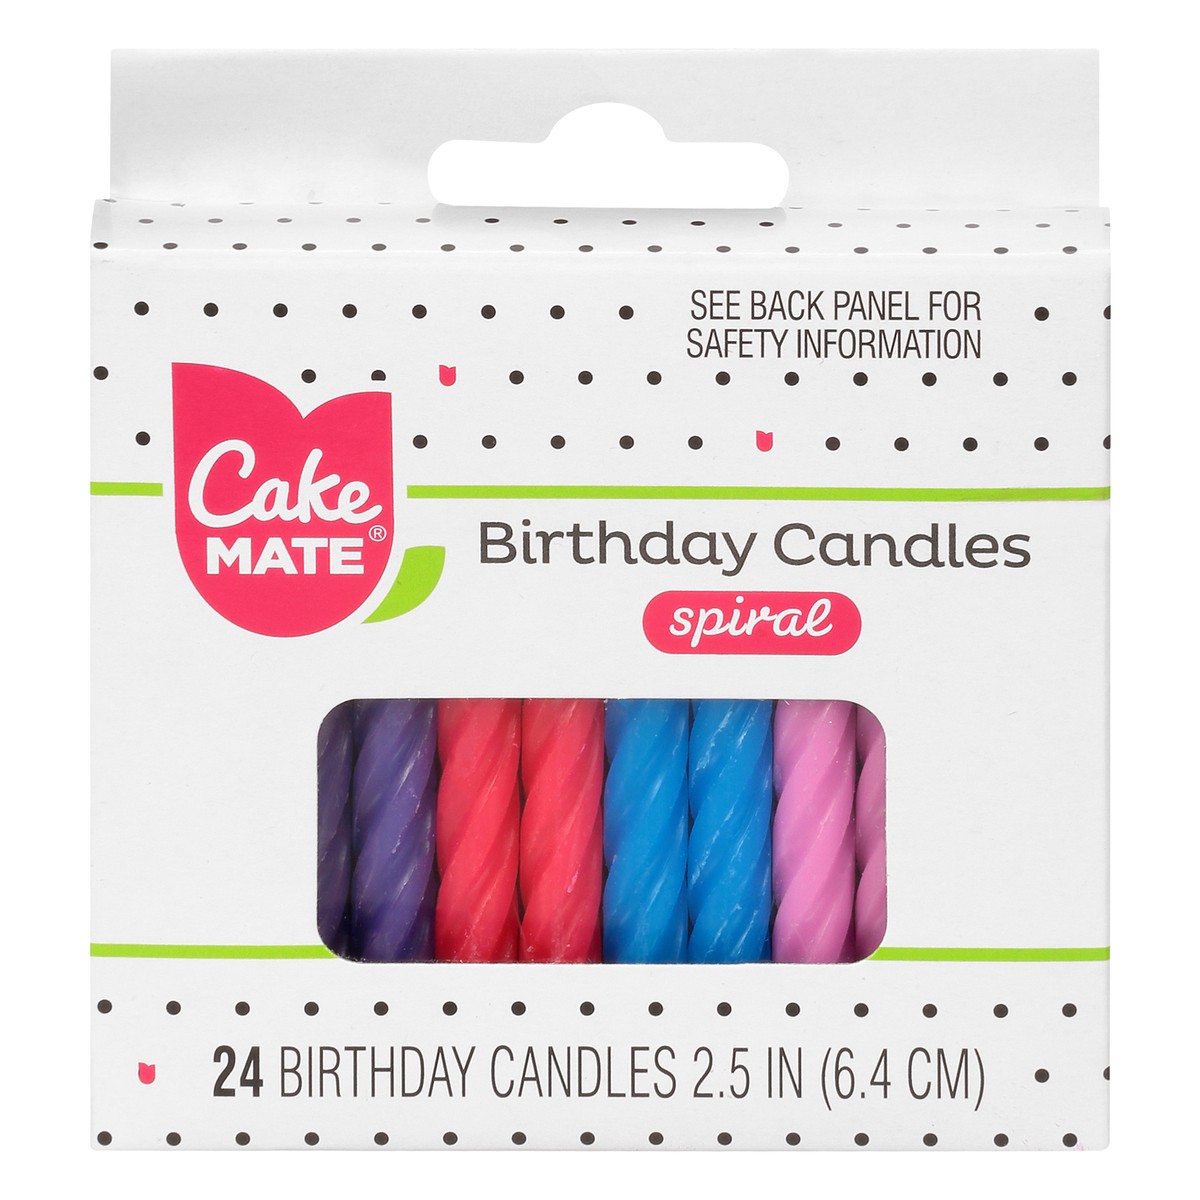 slide 1 of 9, Cake Mate 2.5 Inch Spiral Birthday Candles 24 ea, 24 ct